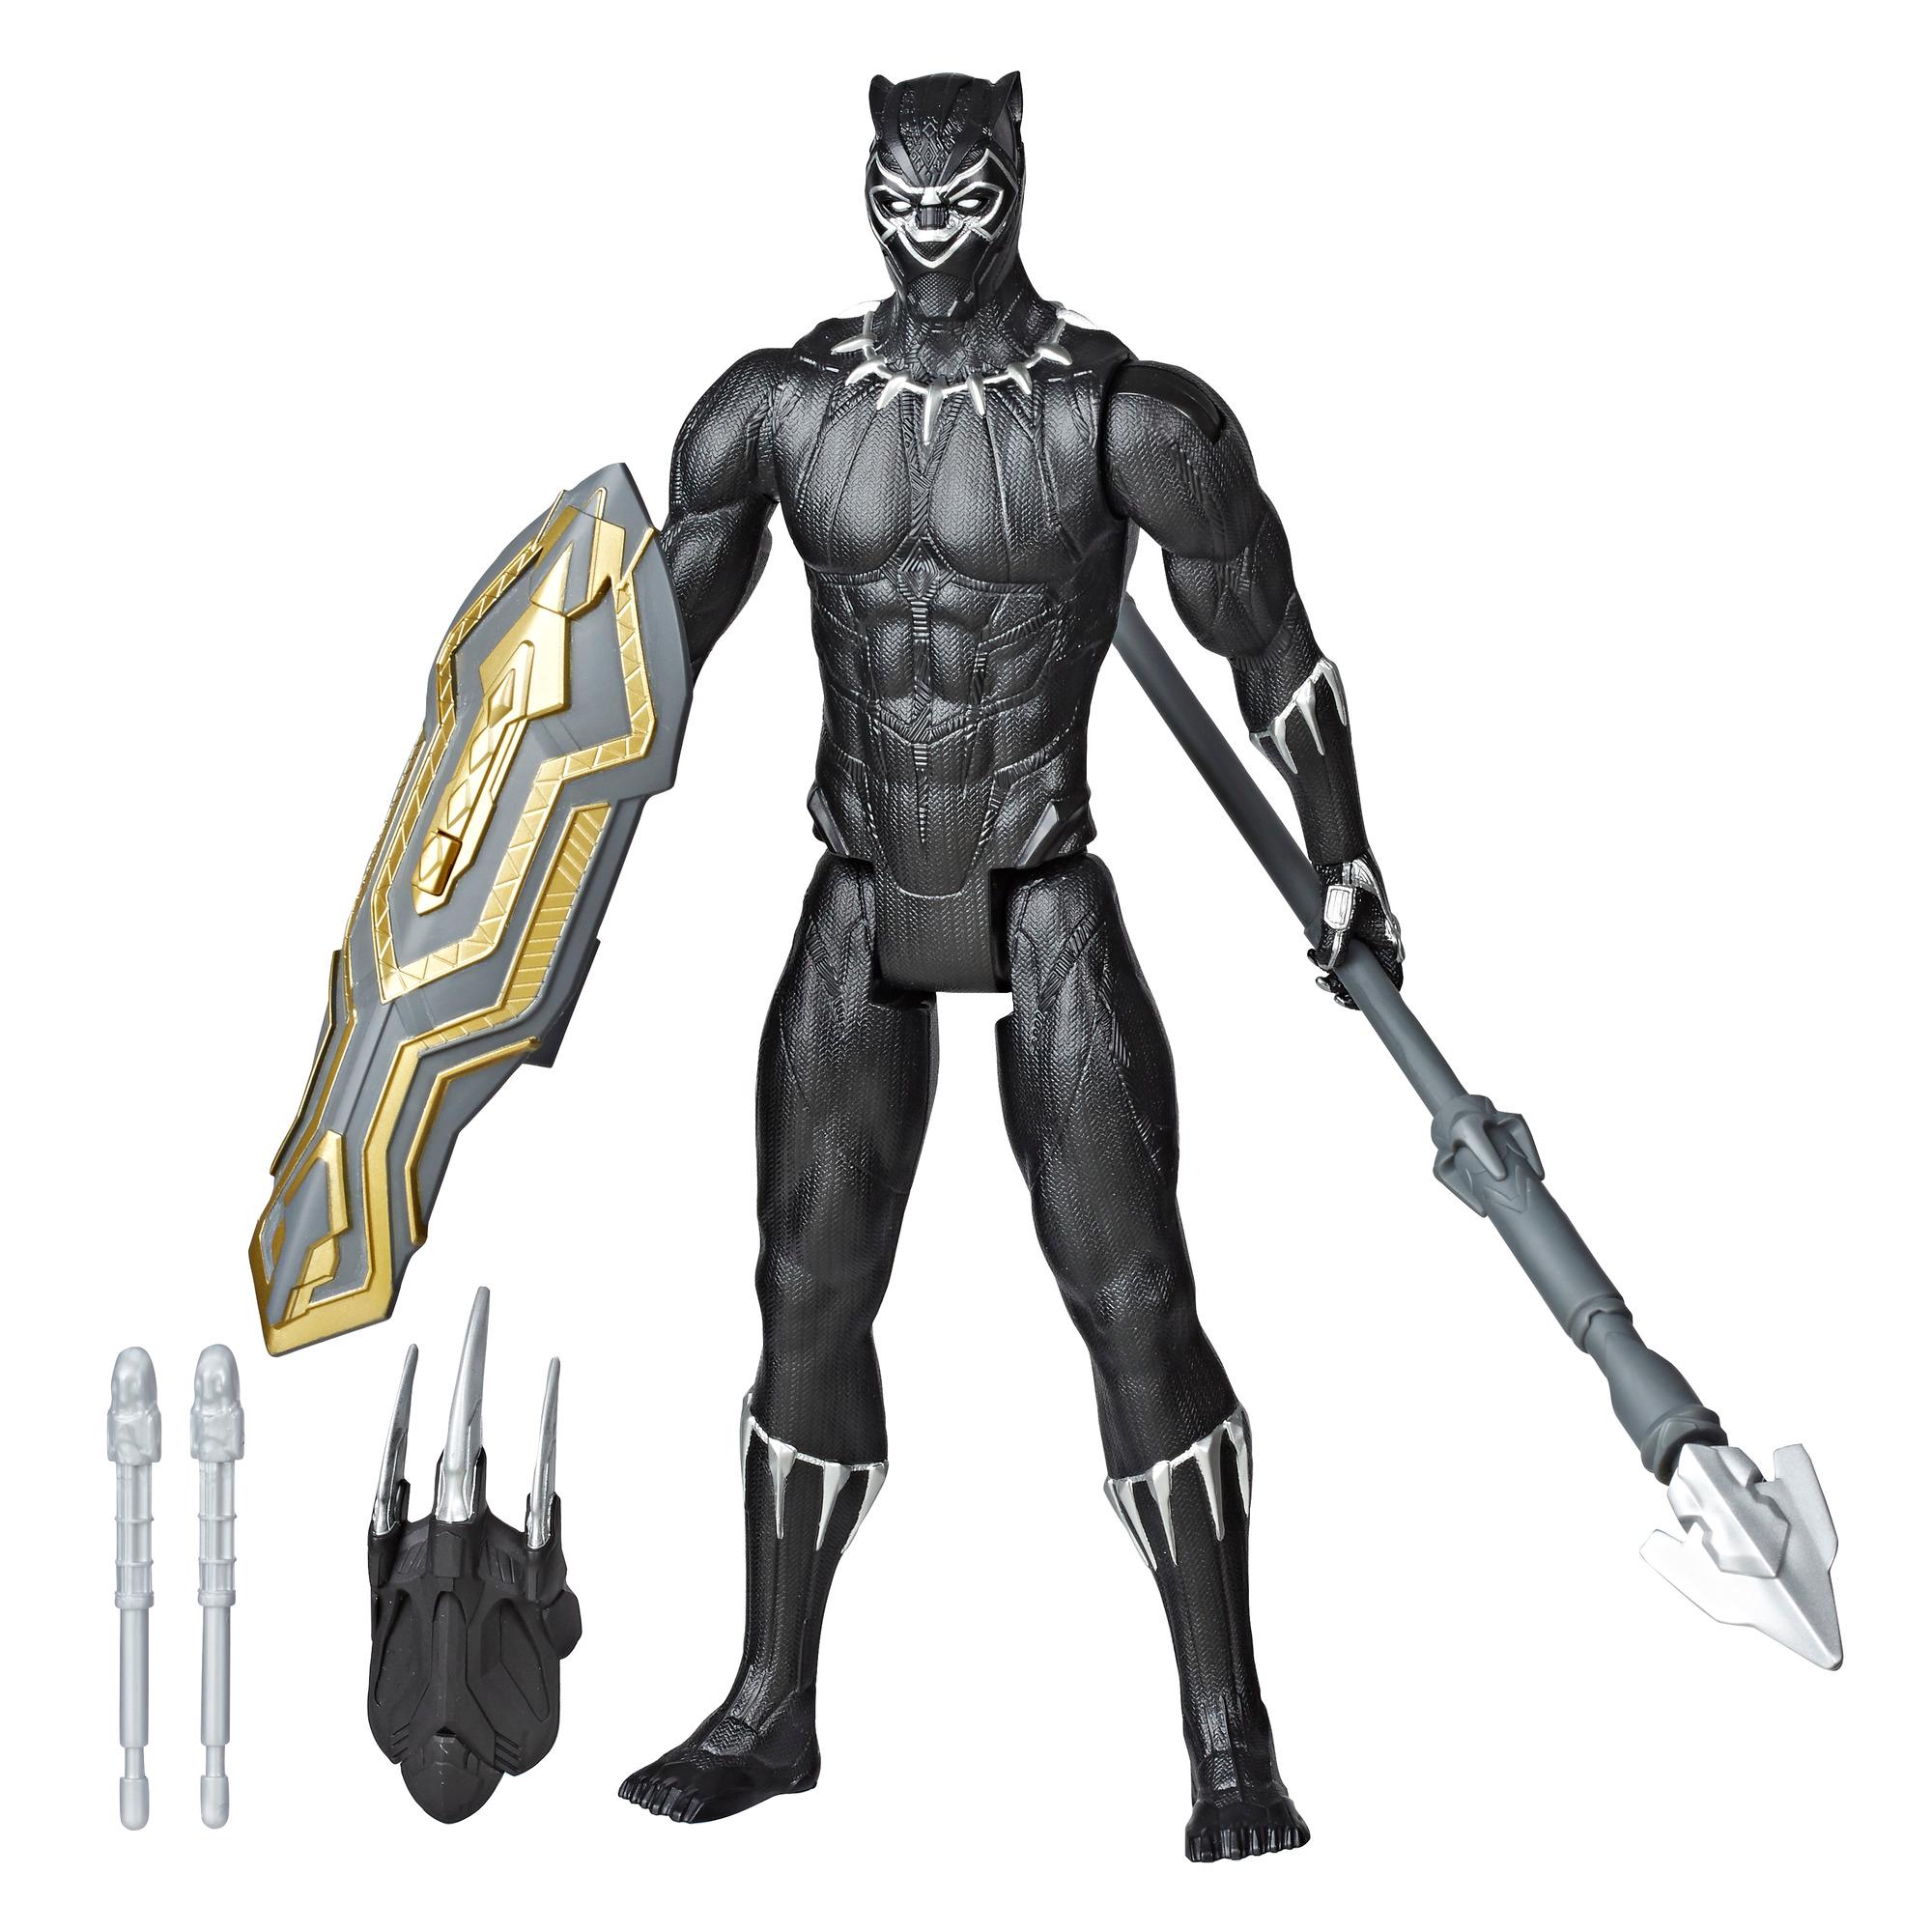 Details about   ☀️ NEW HASBRO MARVEL Titan Hero Series Black Panther Avengers Action Figure 12" 